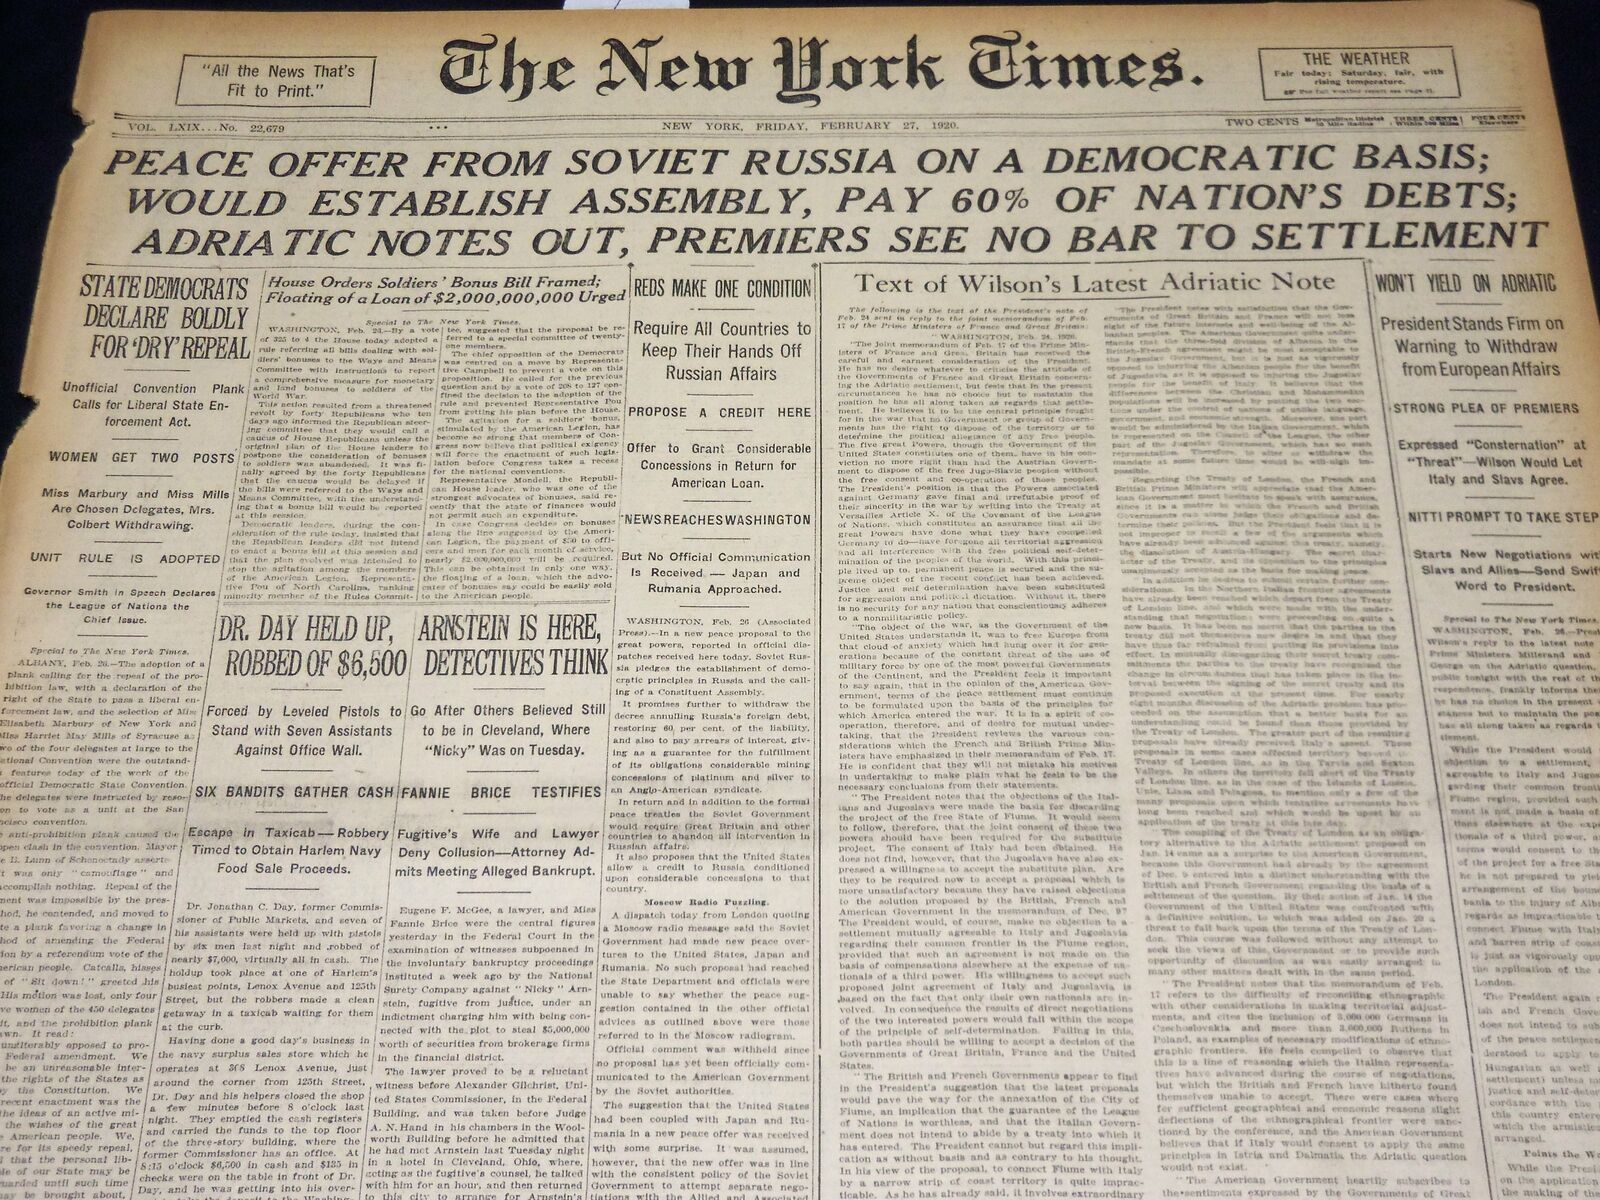 1920 FEBRUARY 27 NEW YORK TIMES - PEACE OFFER FROM SOVIET RUSSIA - NT 7875